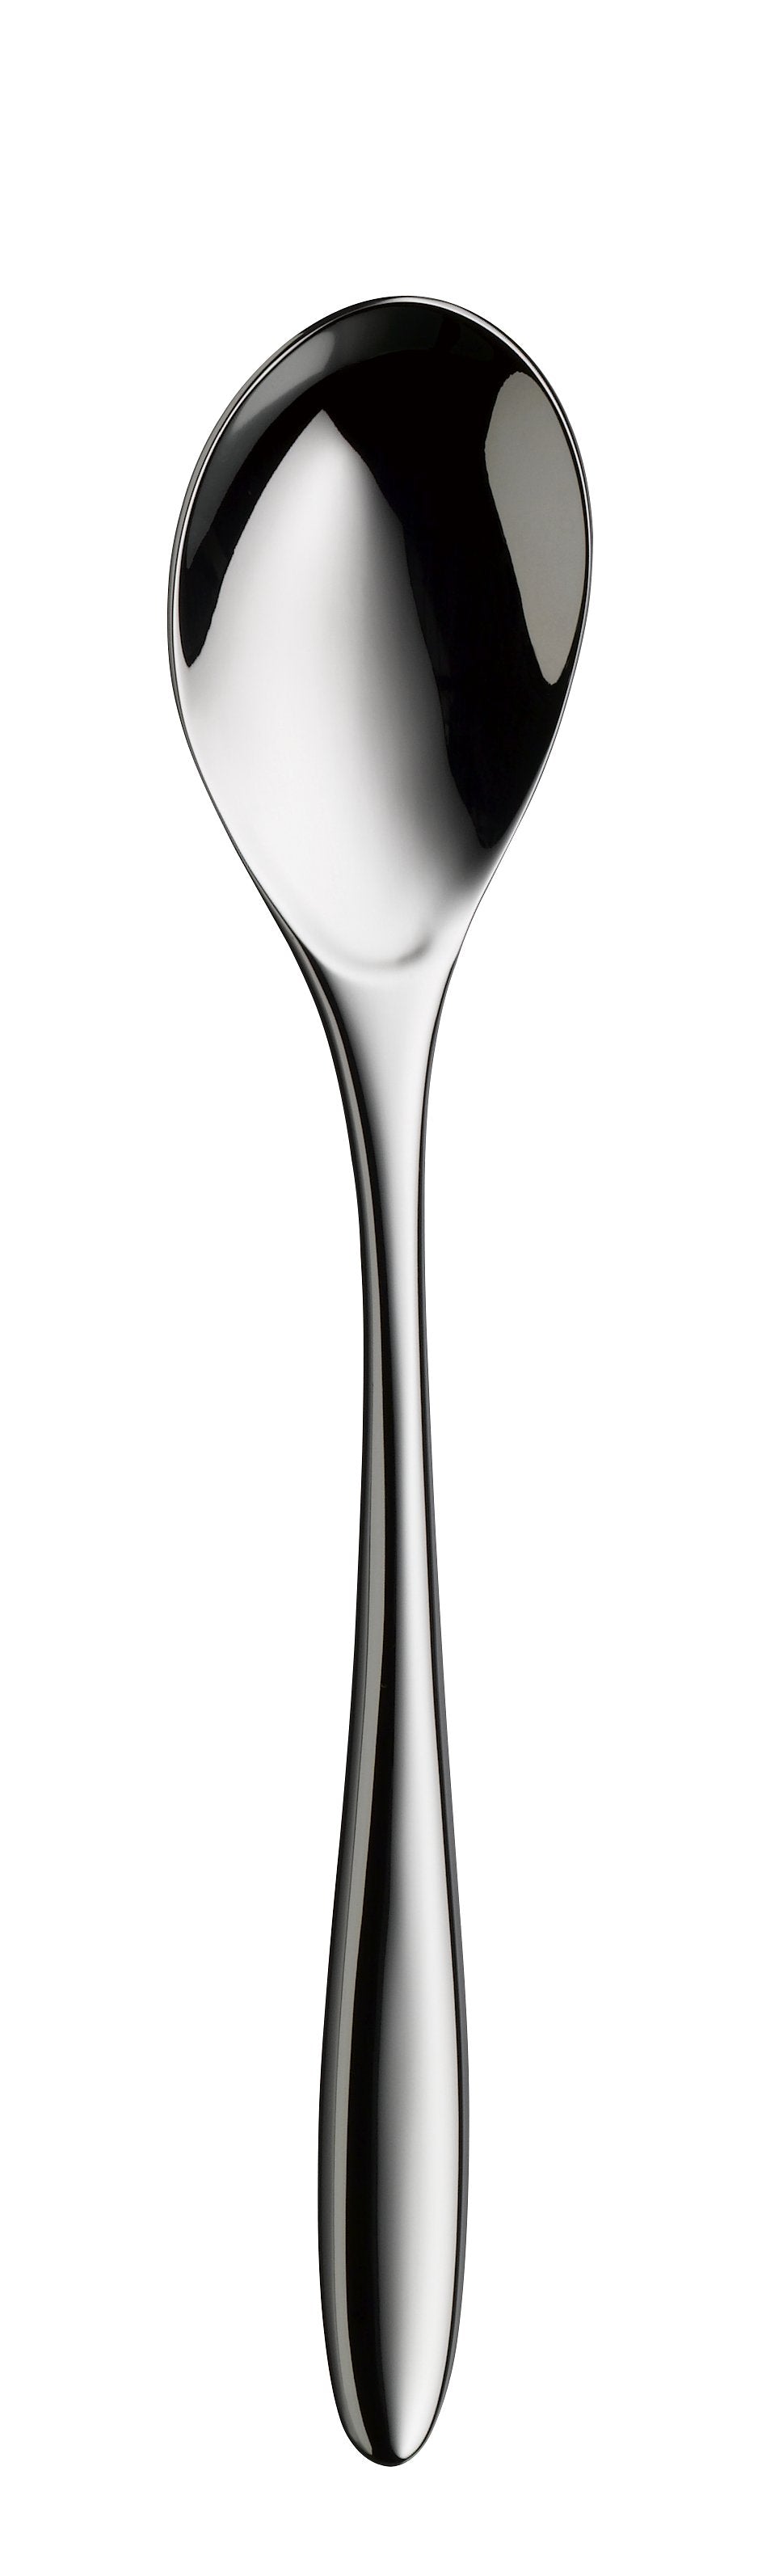 Table spoon AVES silverplated 218mm